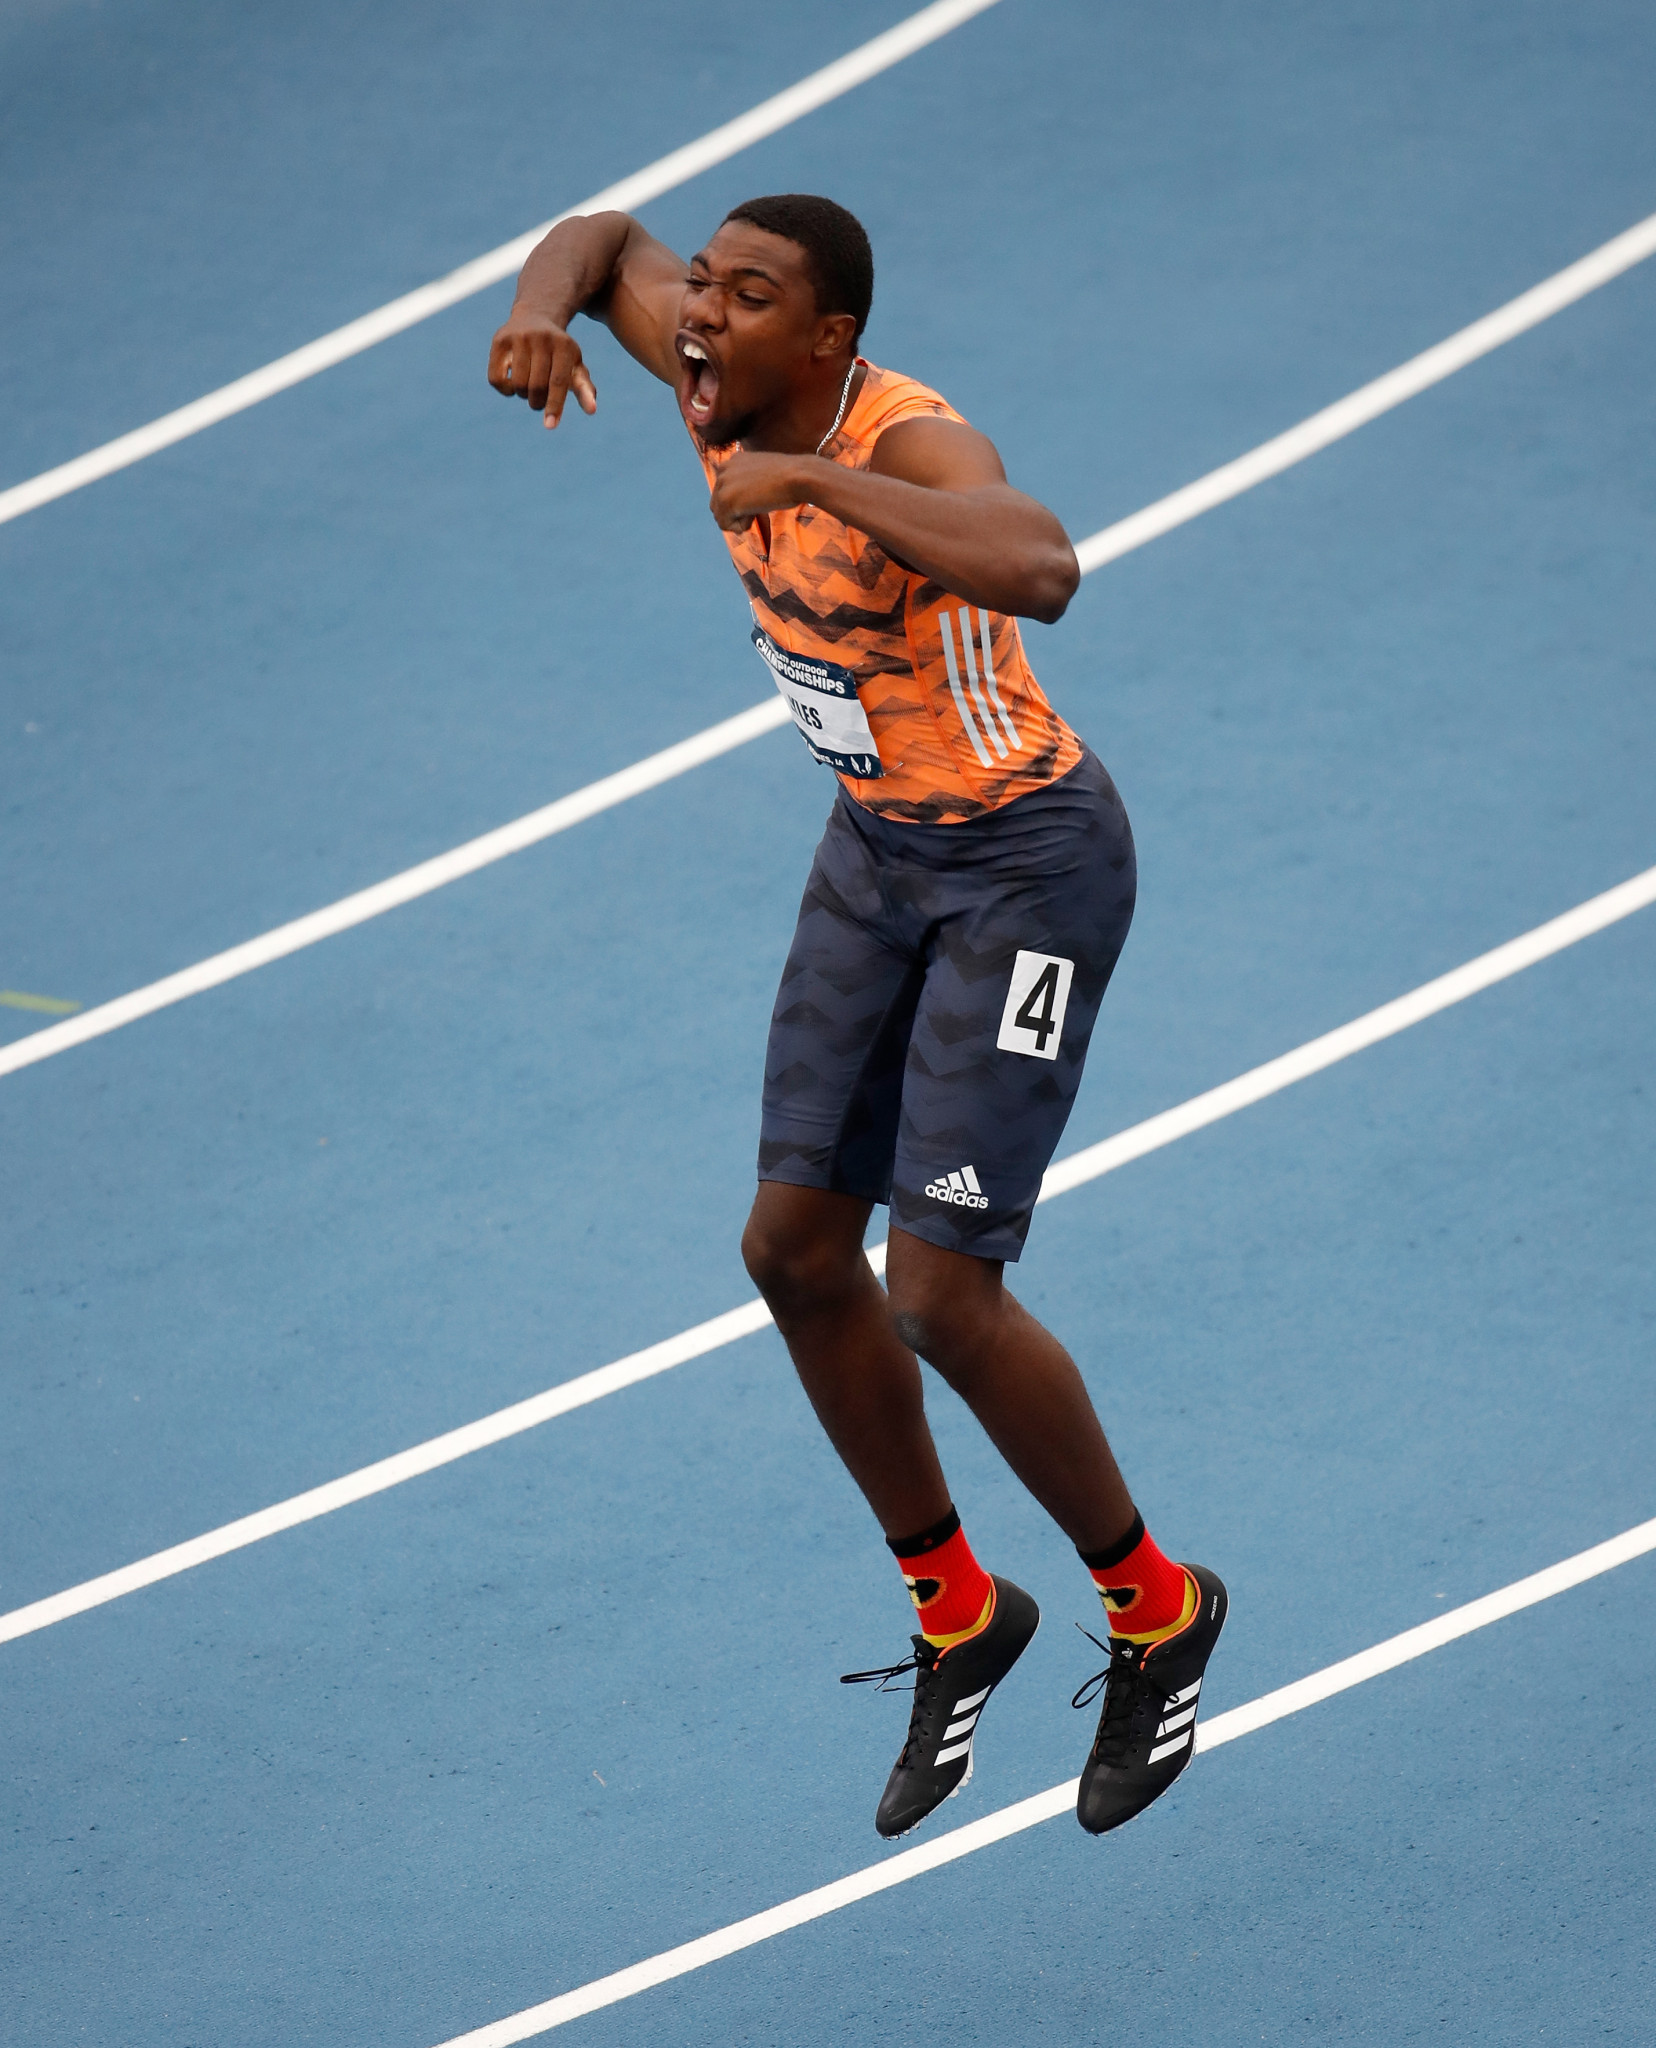 Noah Lyles, celebrating last month's US Championships 100m victory in 9.88sec, is a strong contender to become top dog in the sprints, post-Bolt - but the 20-year-old has strong opposition ©Getty Images  